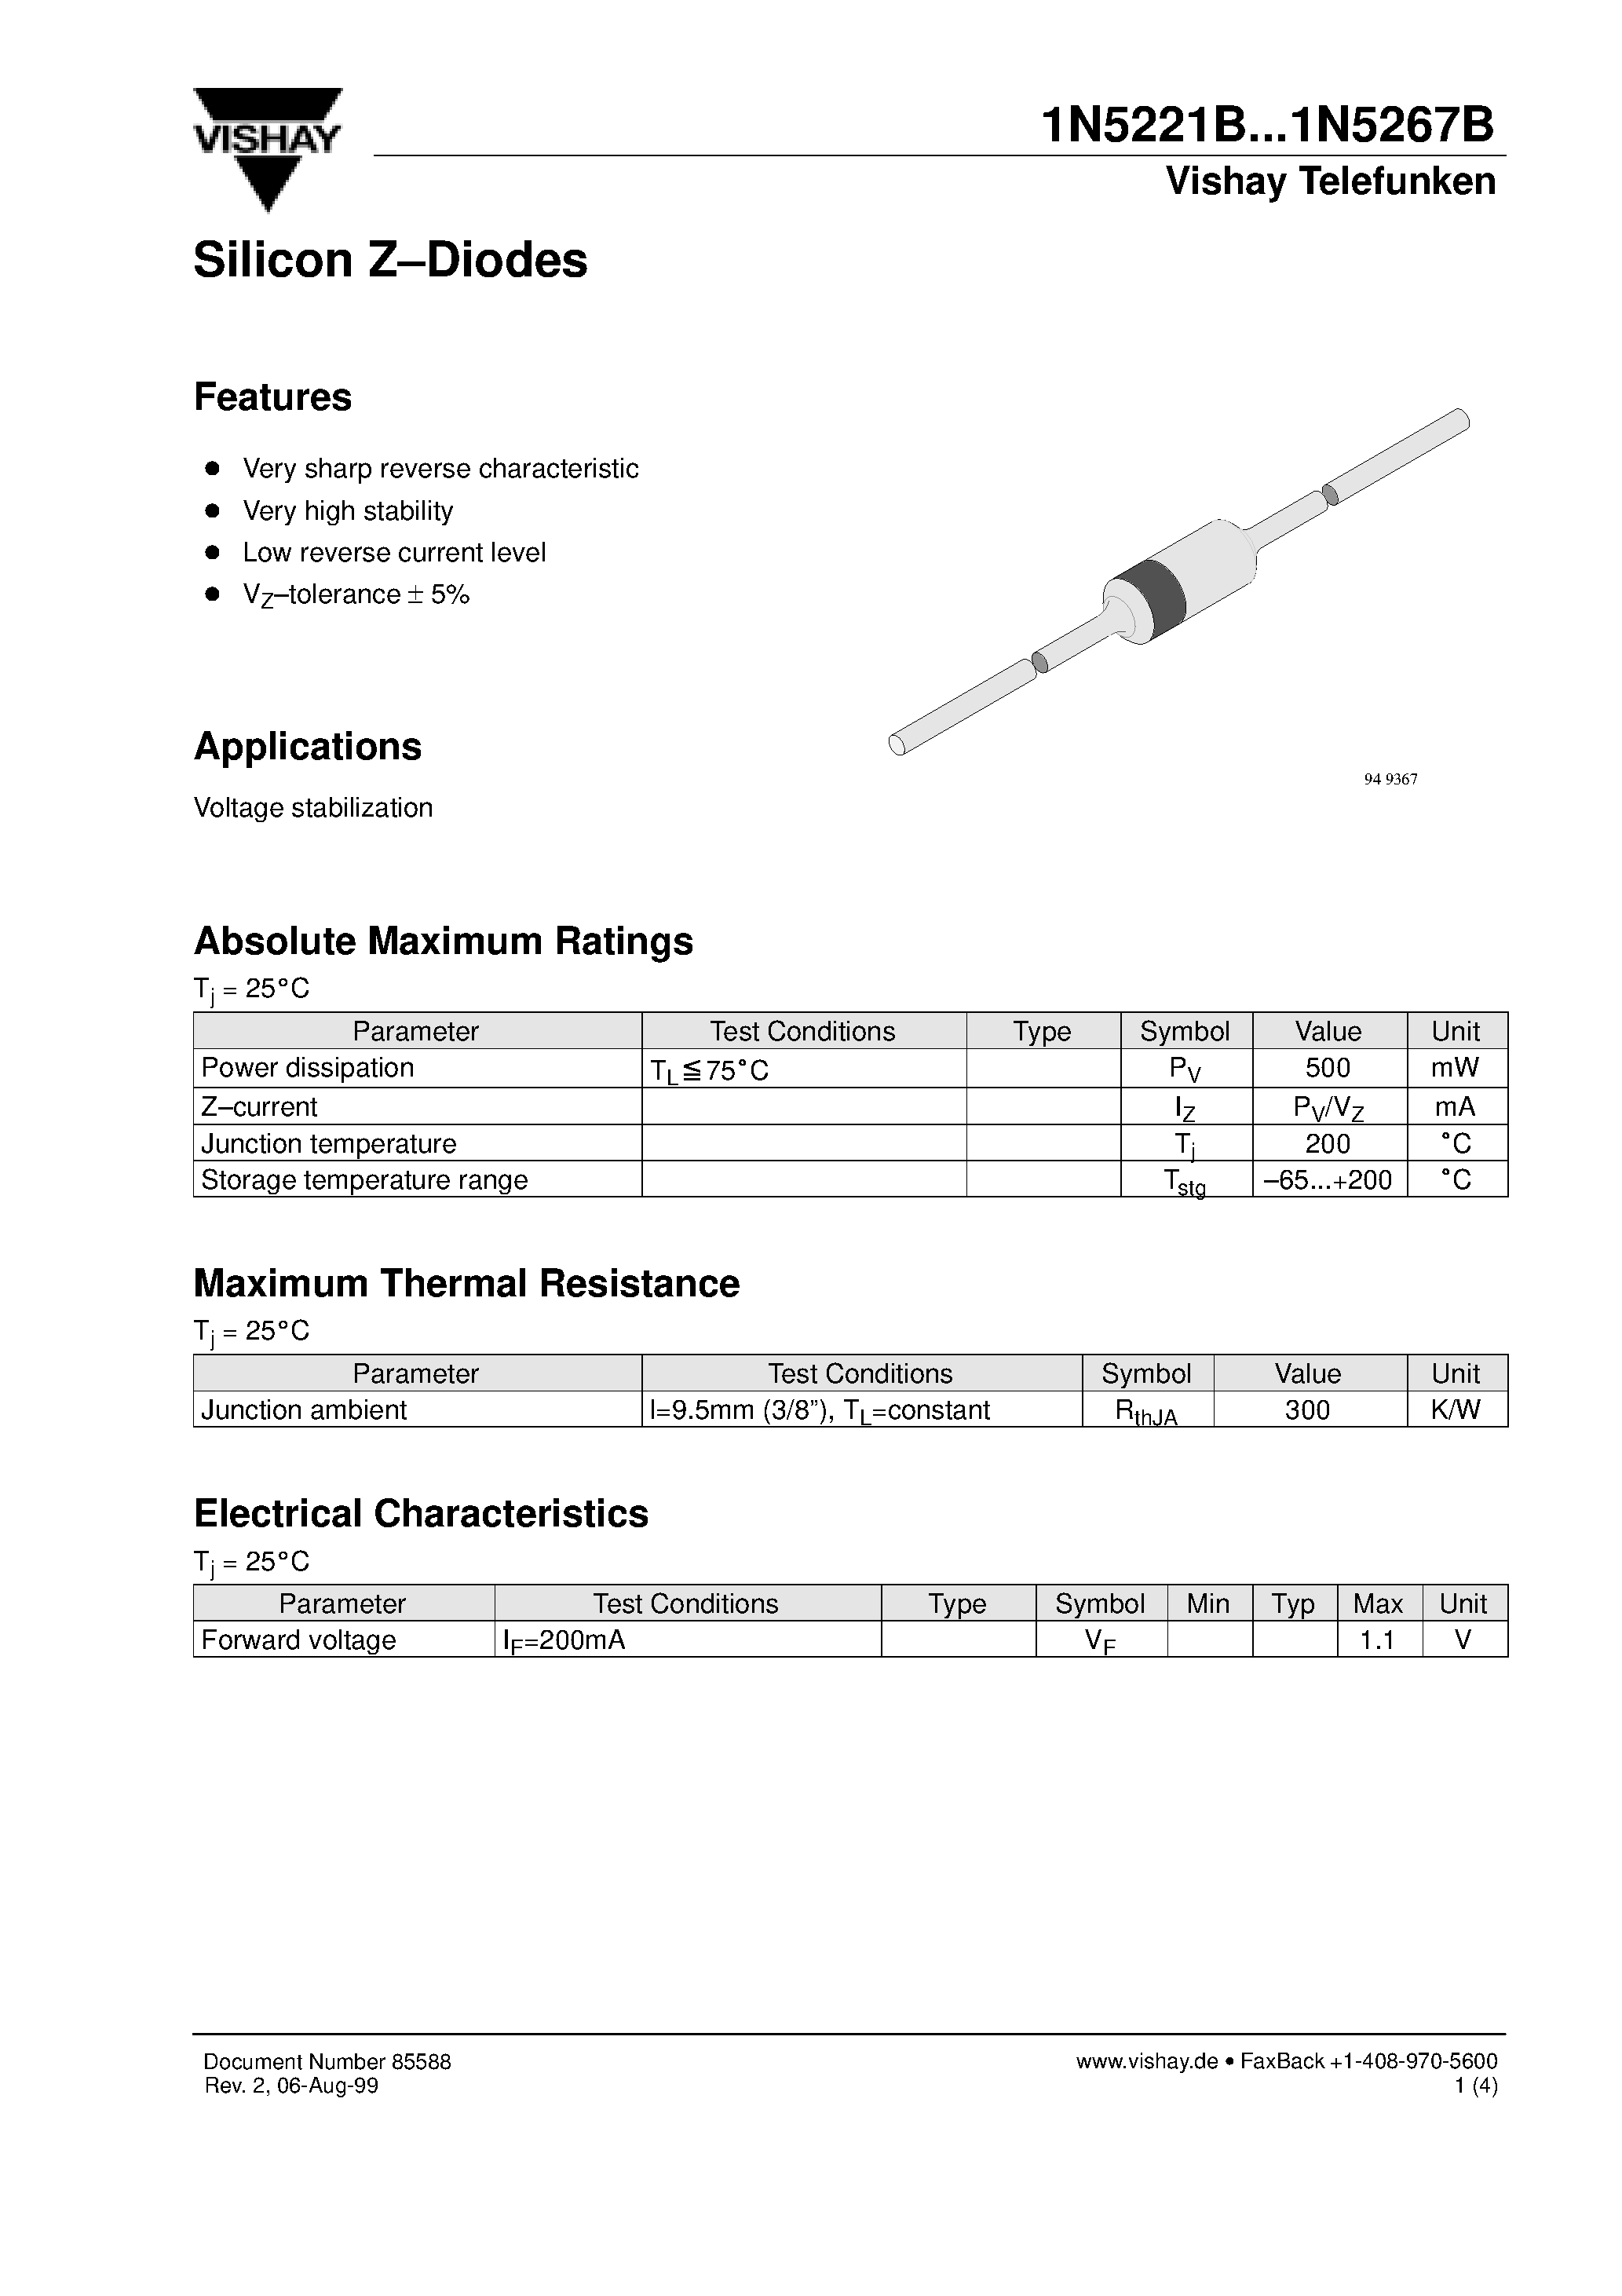 Datasheet 1N5240B - Silicon Z-Diodes page 1